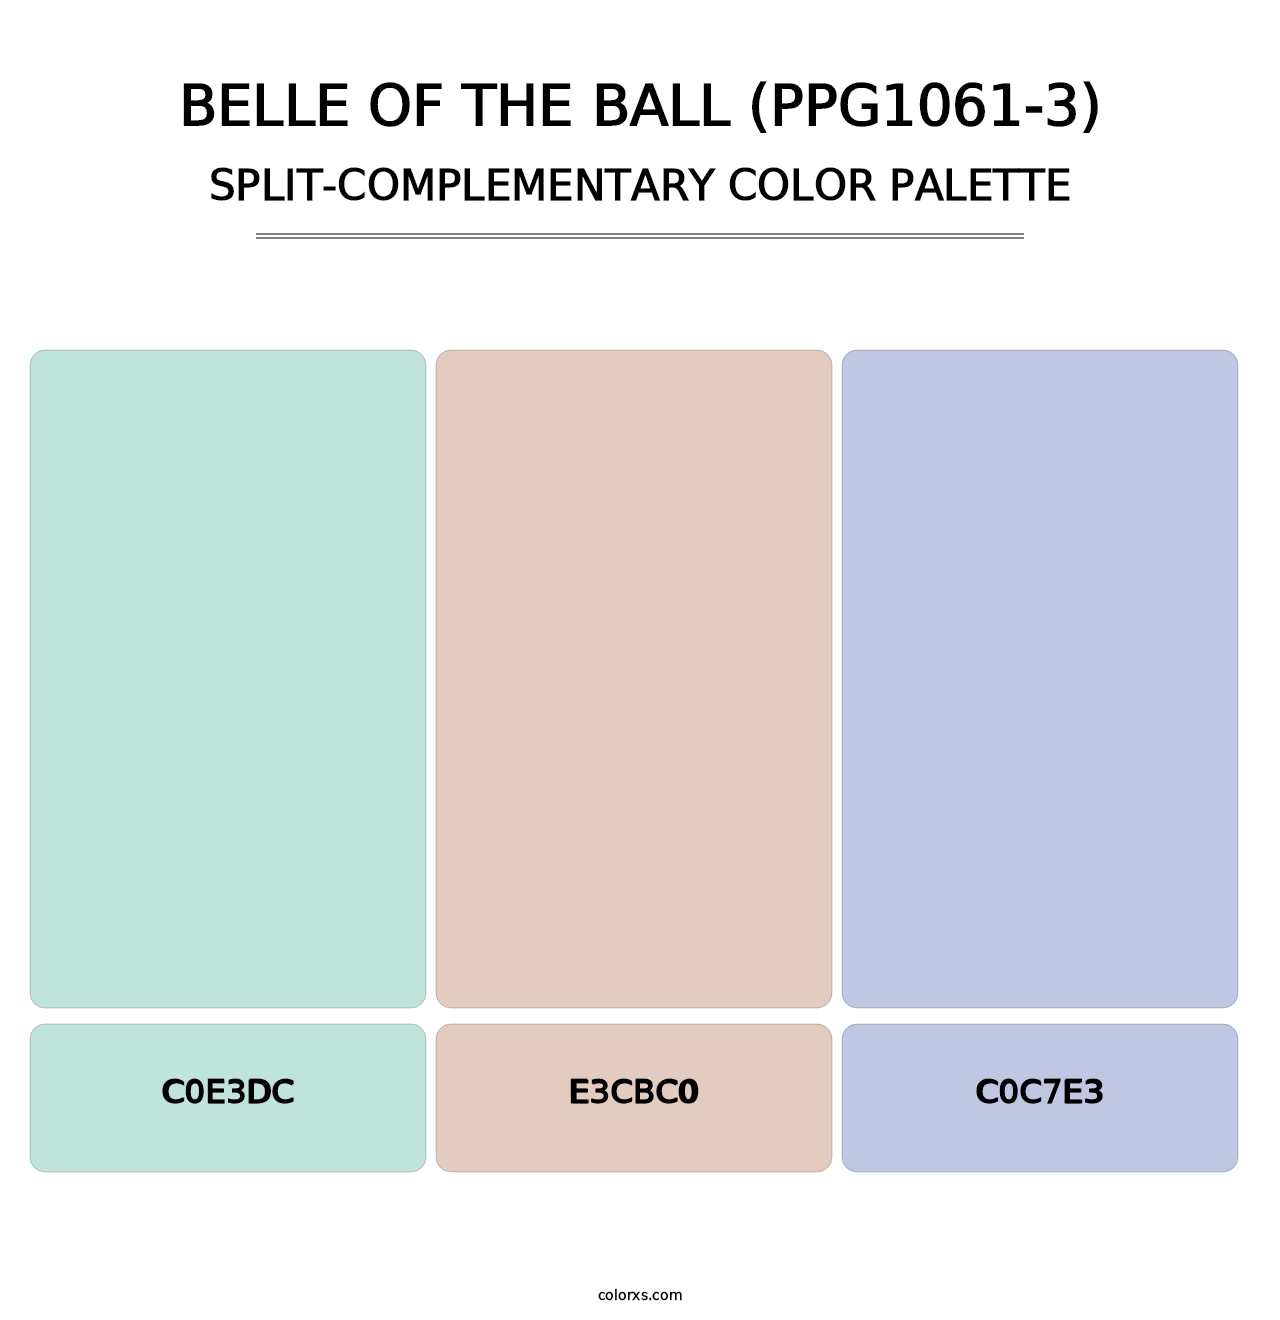 Belle Of The Ball (PPG1061-3) - Split-Complementary Color Palette